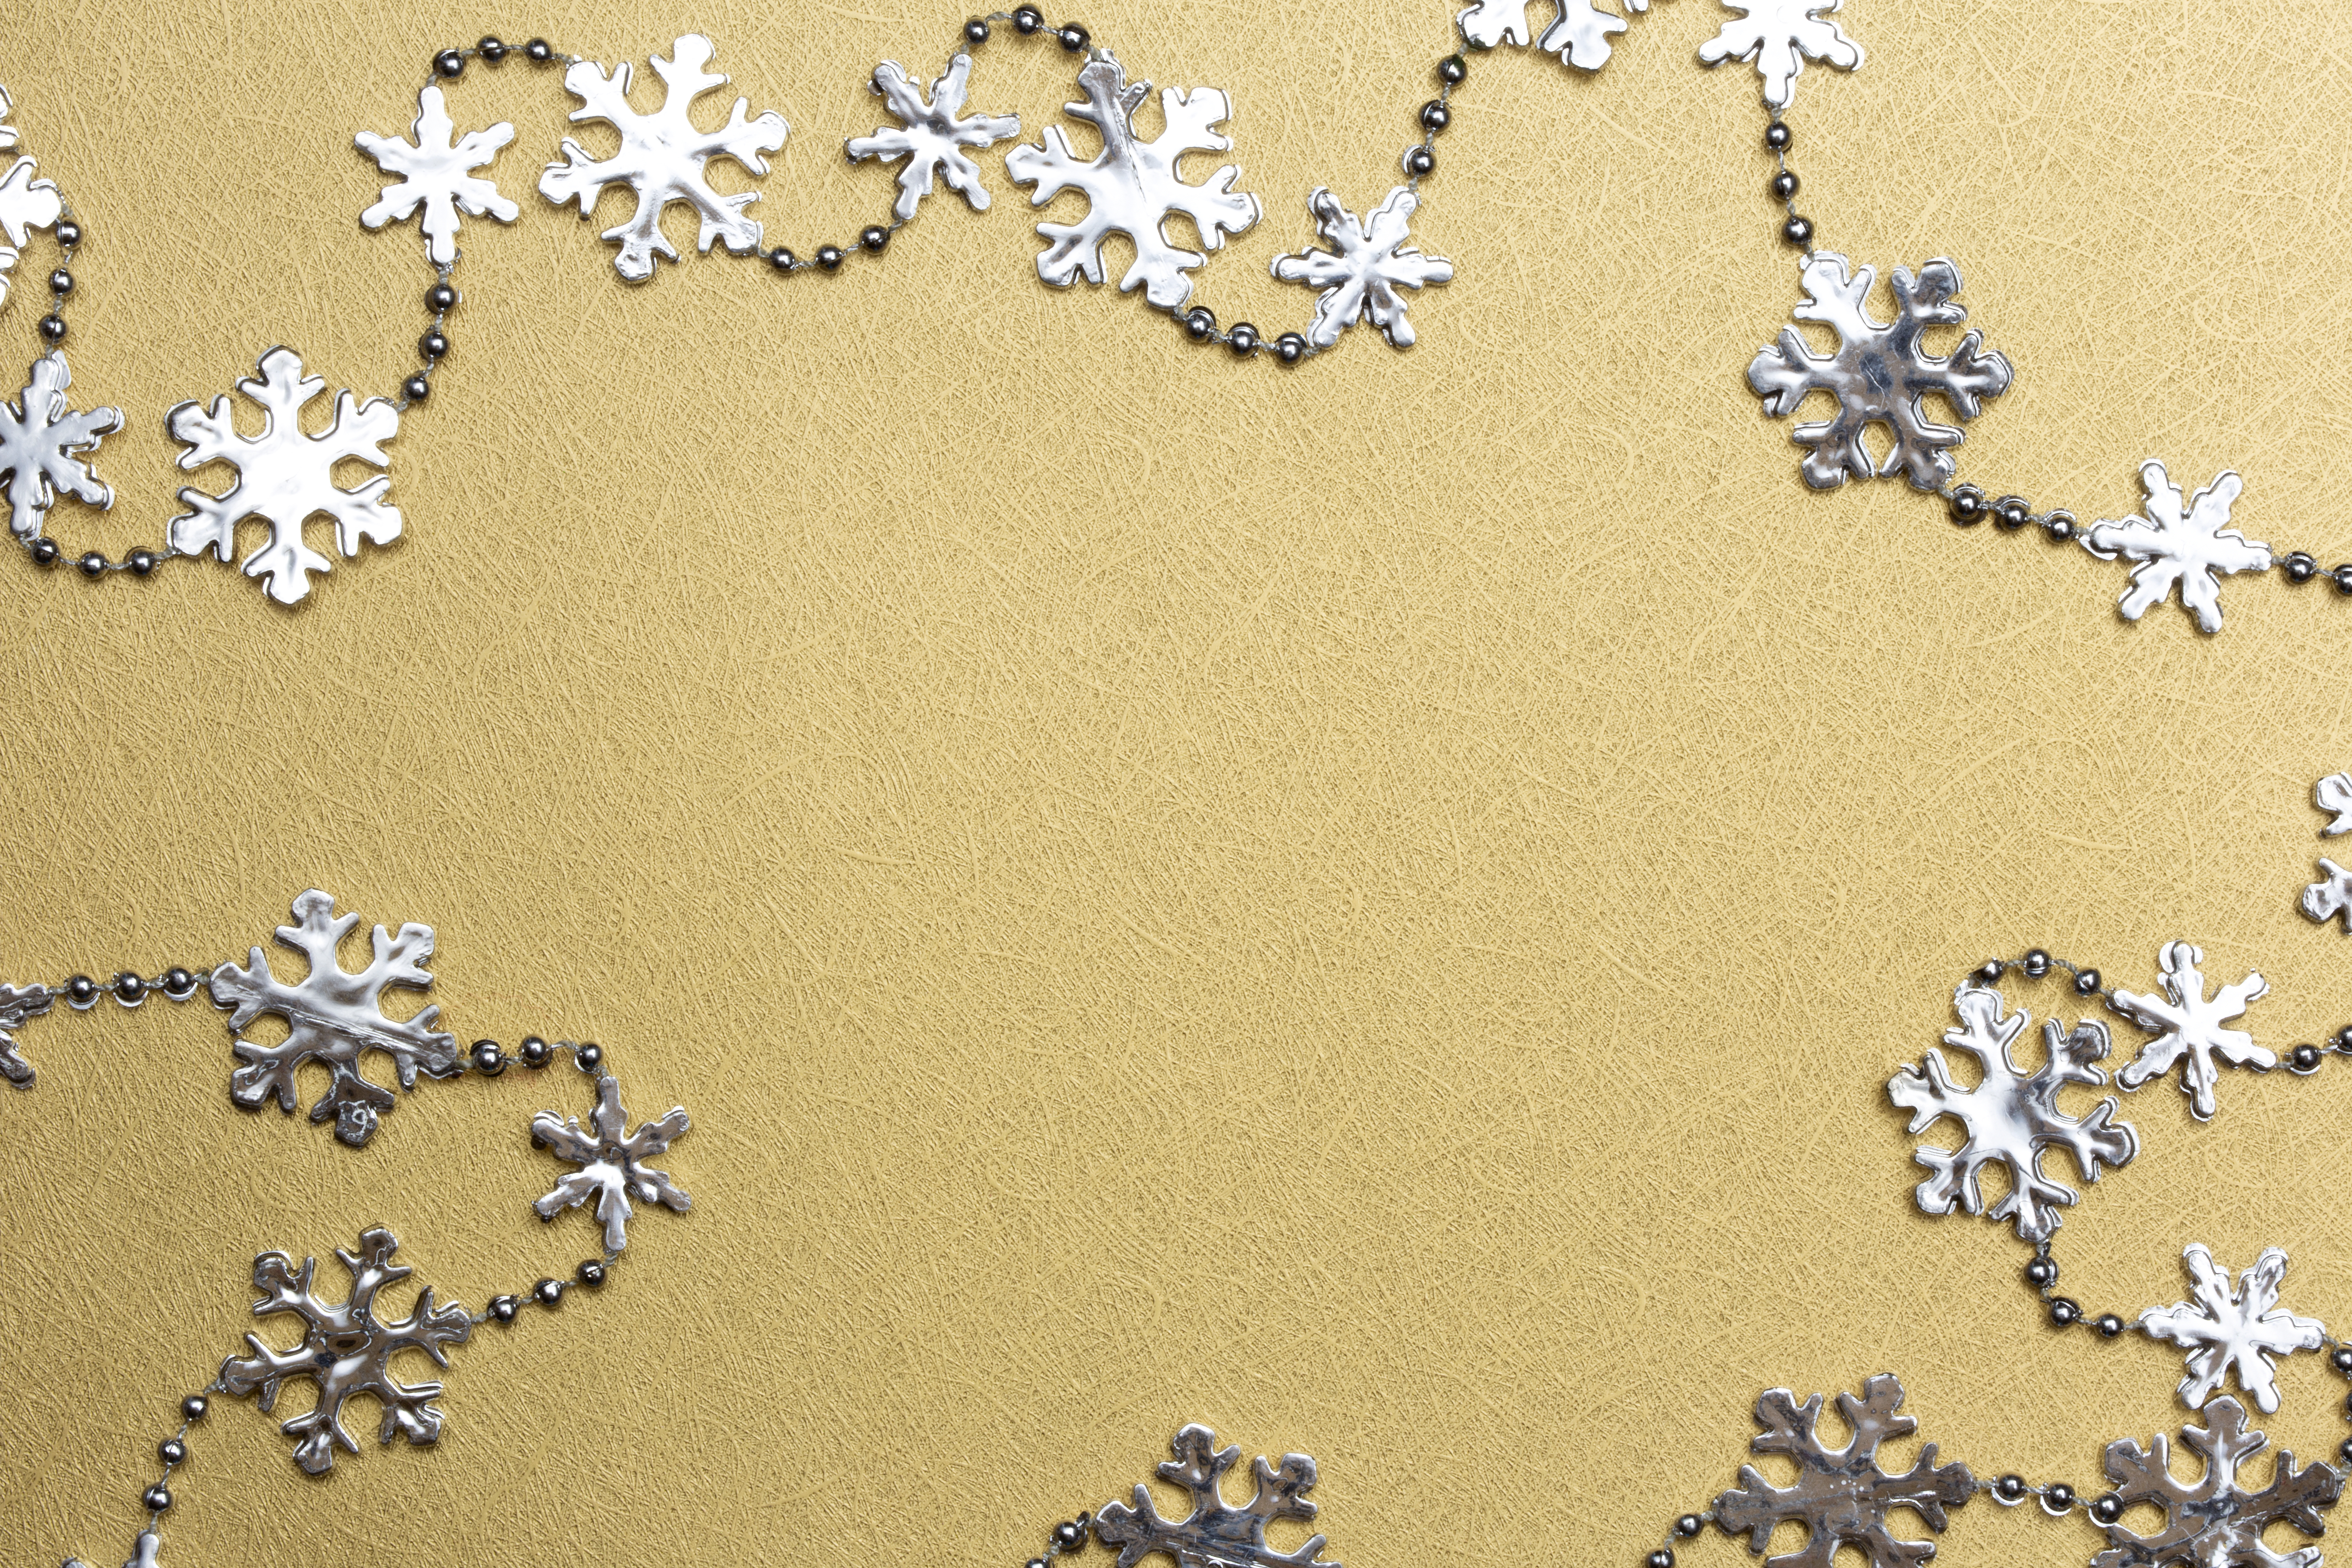 Silver and Gold Snowflakes